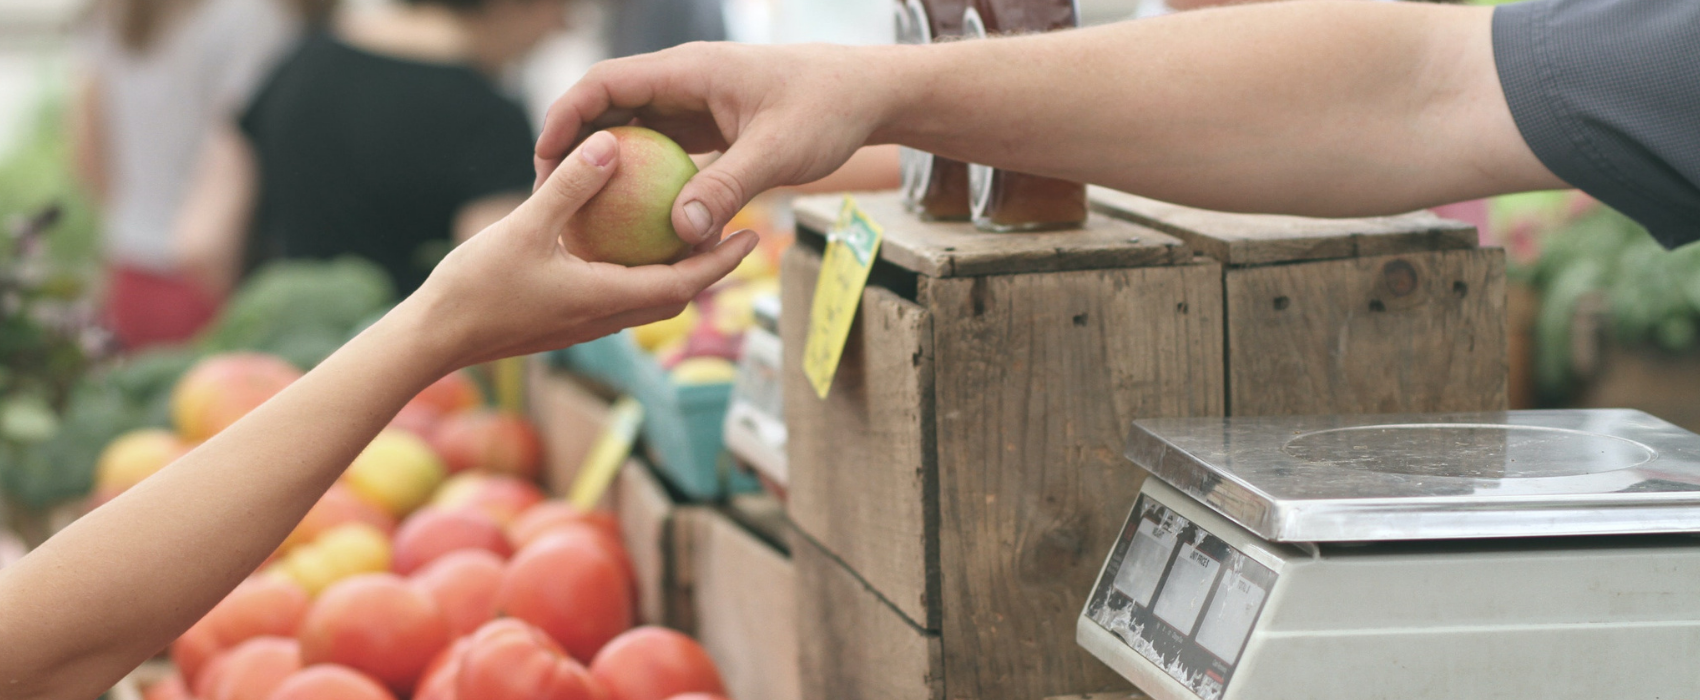 How to overcome grocery staffing challenges head on